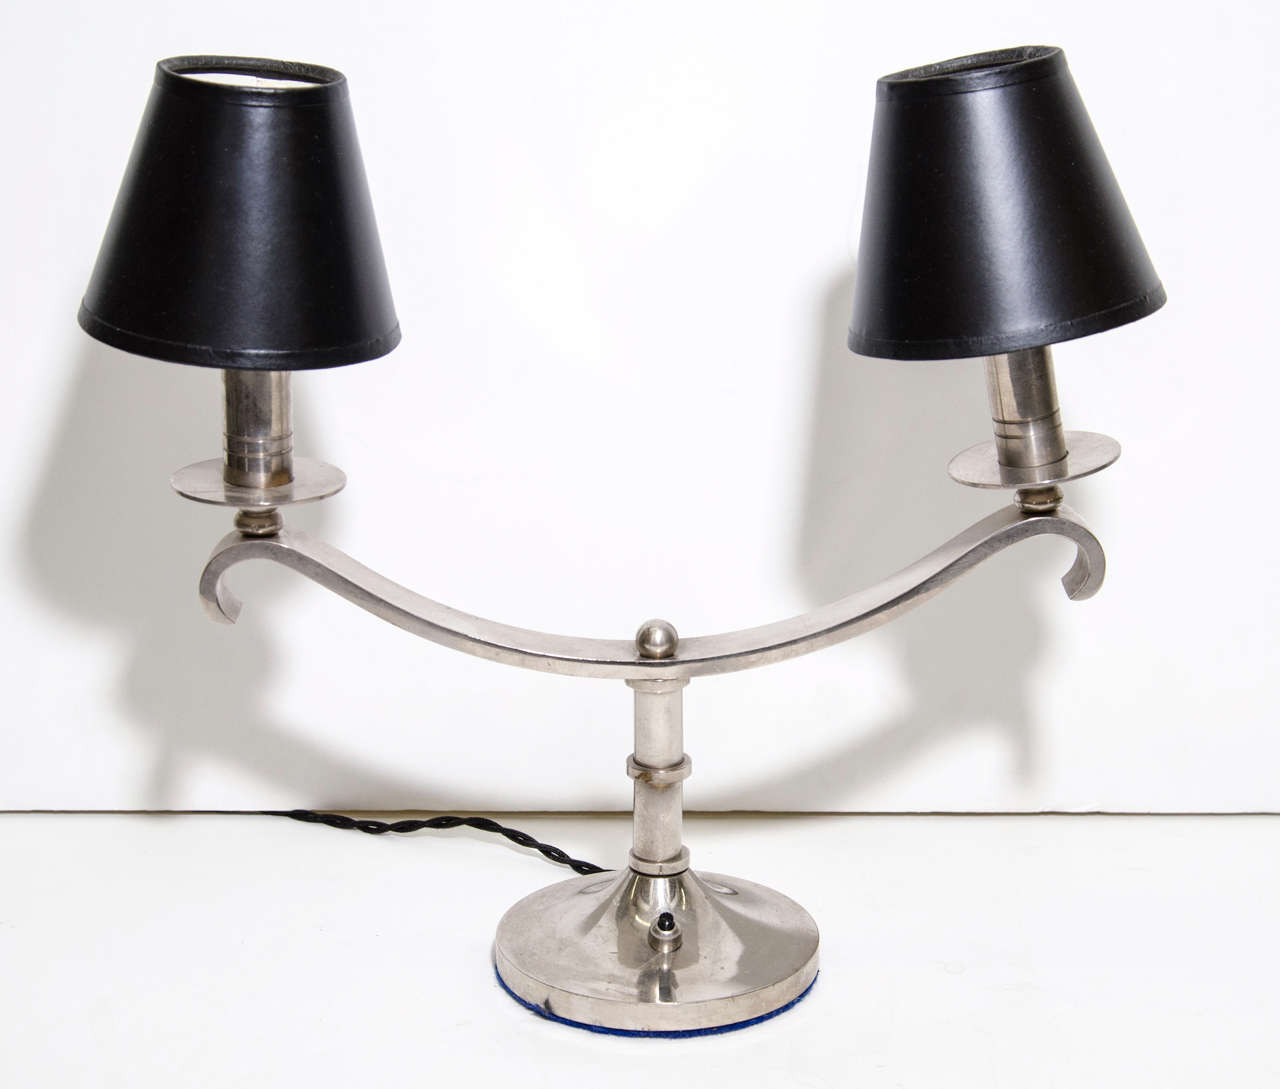 French nickel plate double candelabra mantle or table lights, circa 1930. Rewired with new silk covered cord and new black shades.